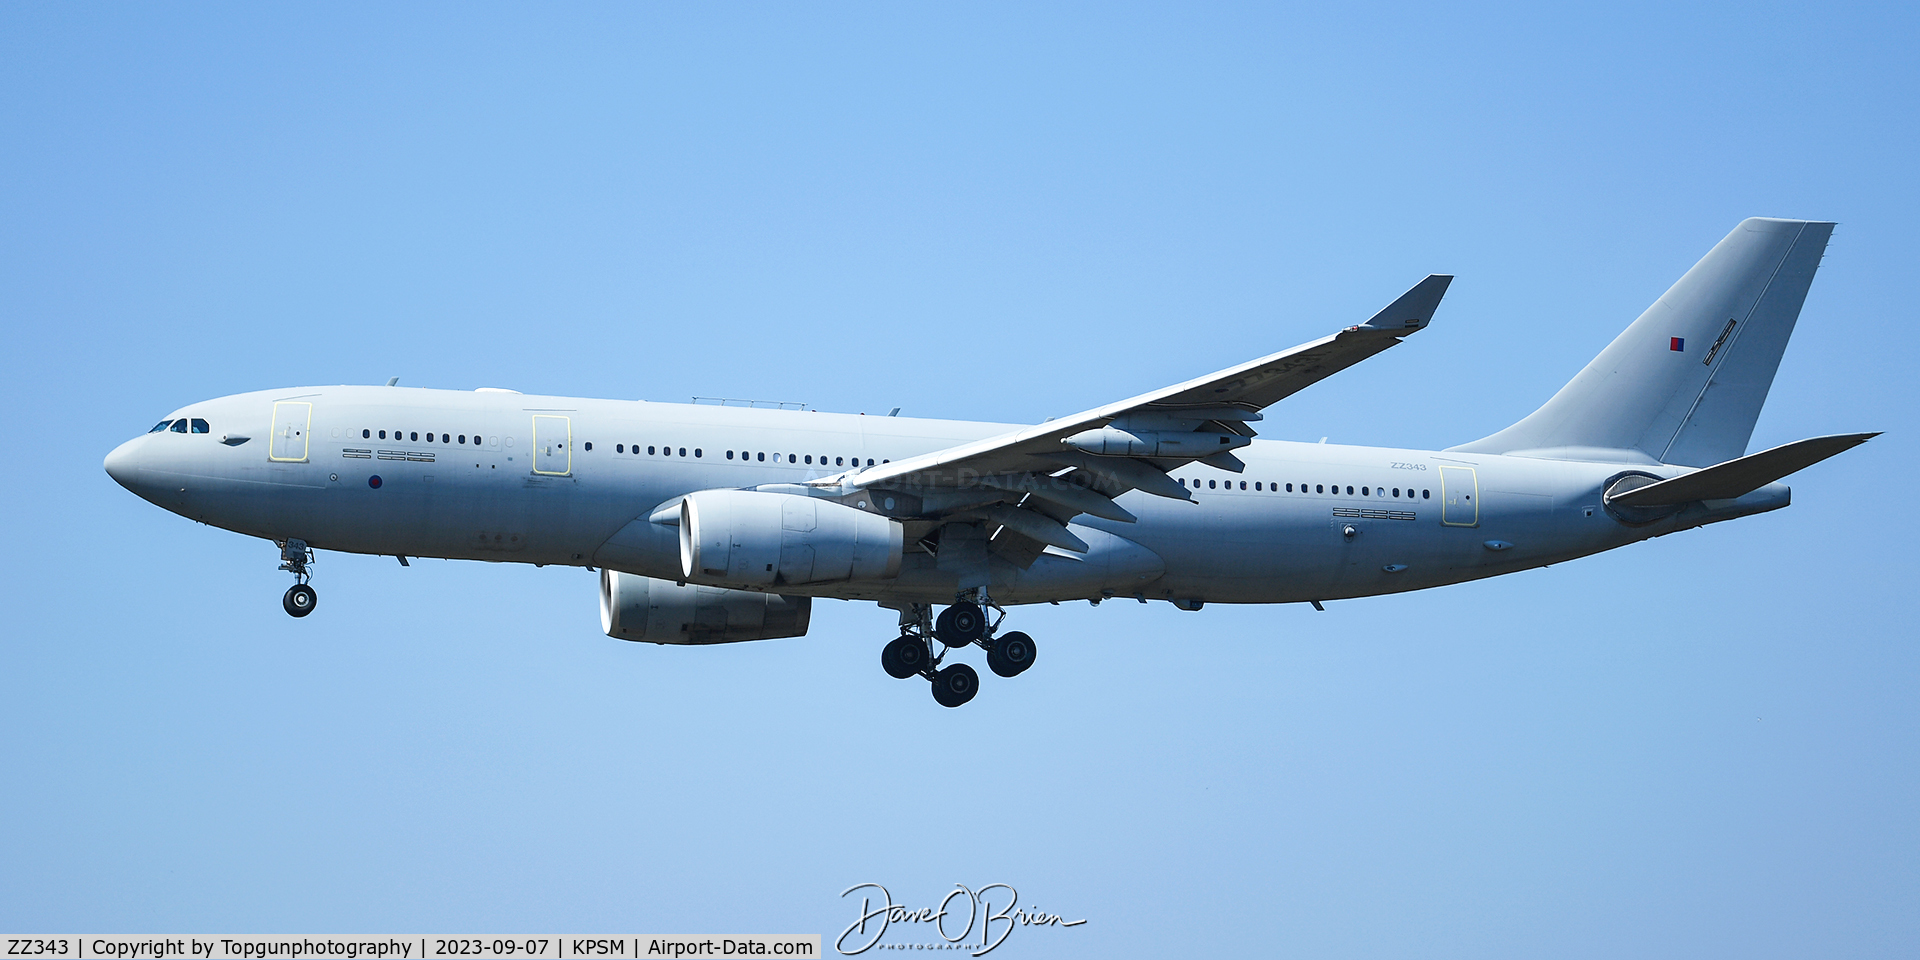 ZZ343, 2015 Airbus A330-243MRTT (KC2 Voyager) C/N 1610, ASCOT2126 inbound for customs clearance